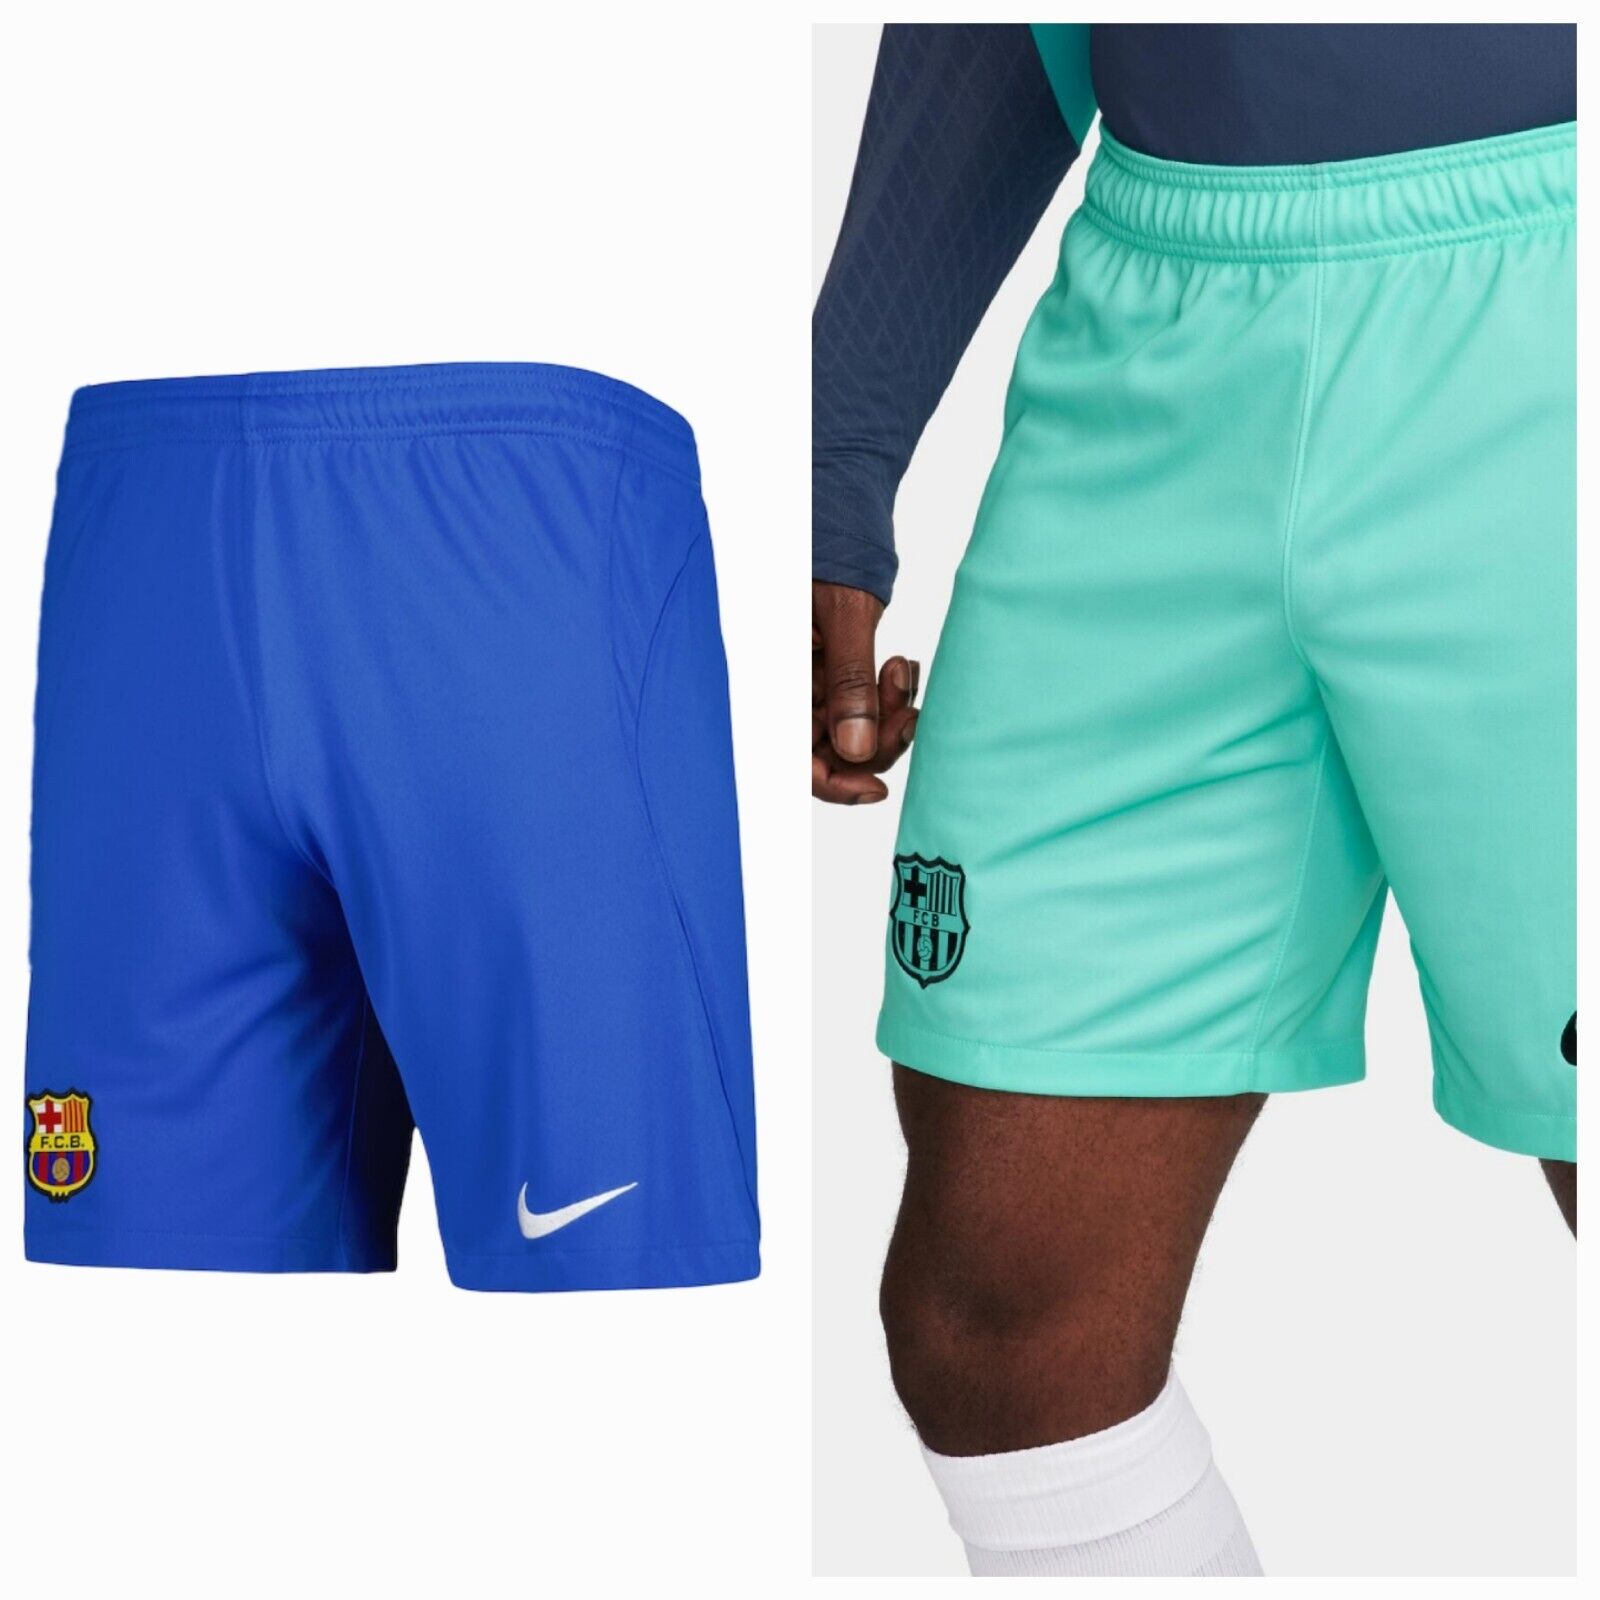 2023/24 Nike Barcelona Away and Third shorts - Size L - Brand New Without Tags